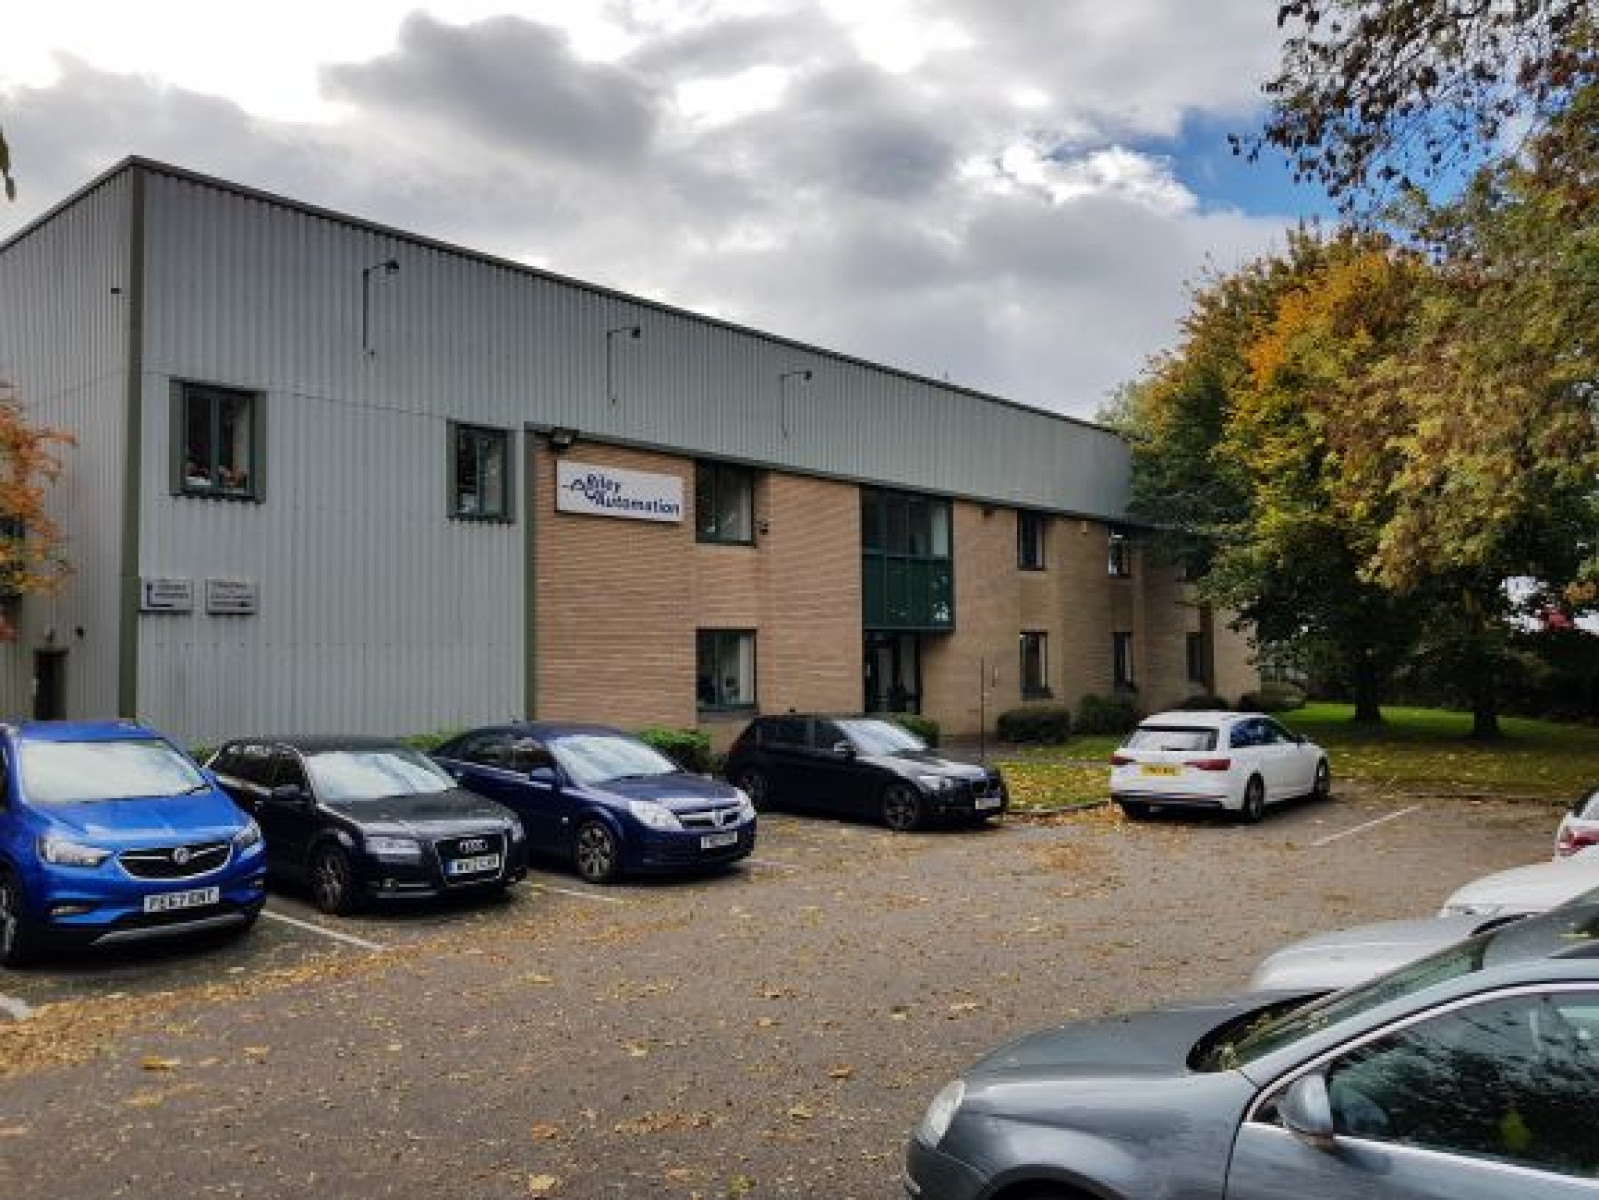 Riley Automation Ltd joins leading Midlands indust...